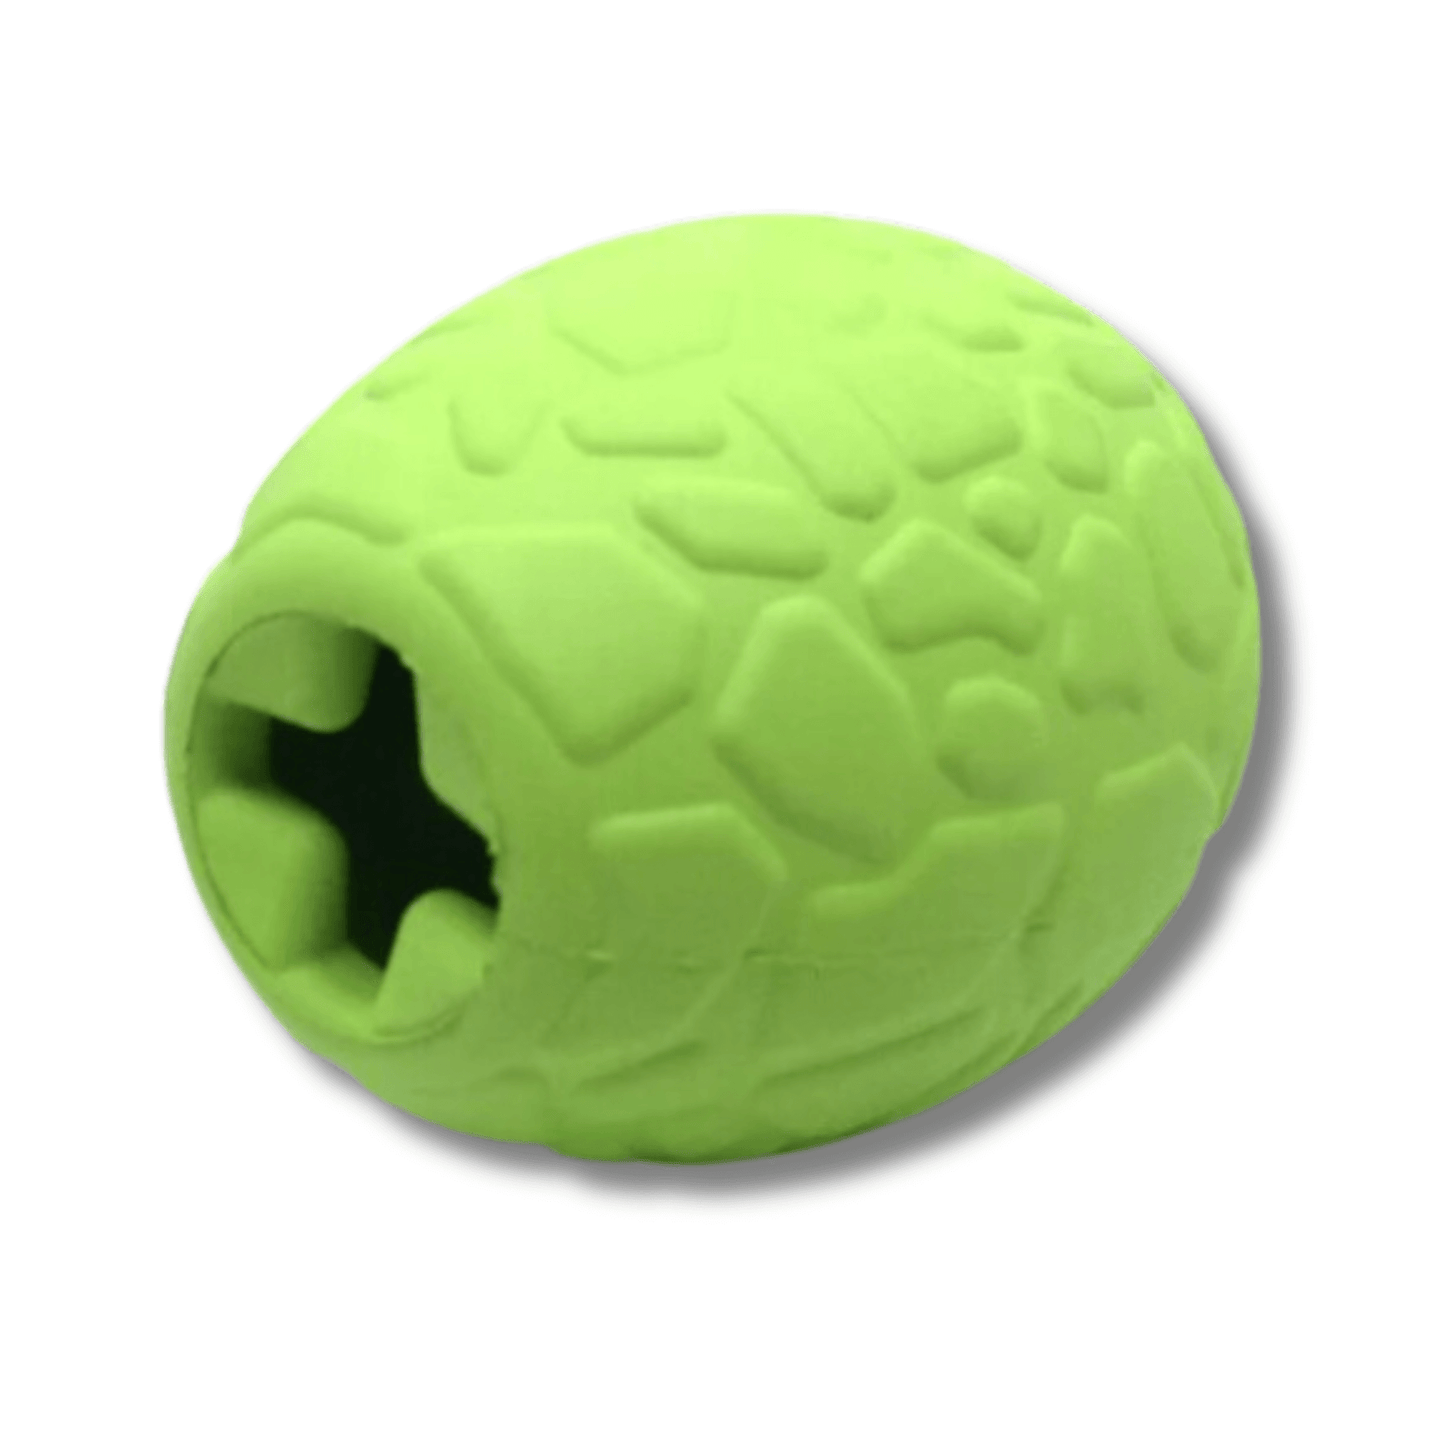 Durable Dino shaped treat dispenser and chew toy